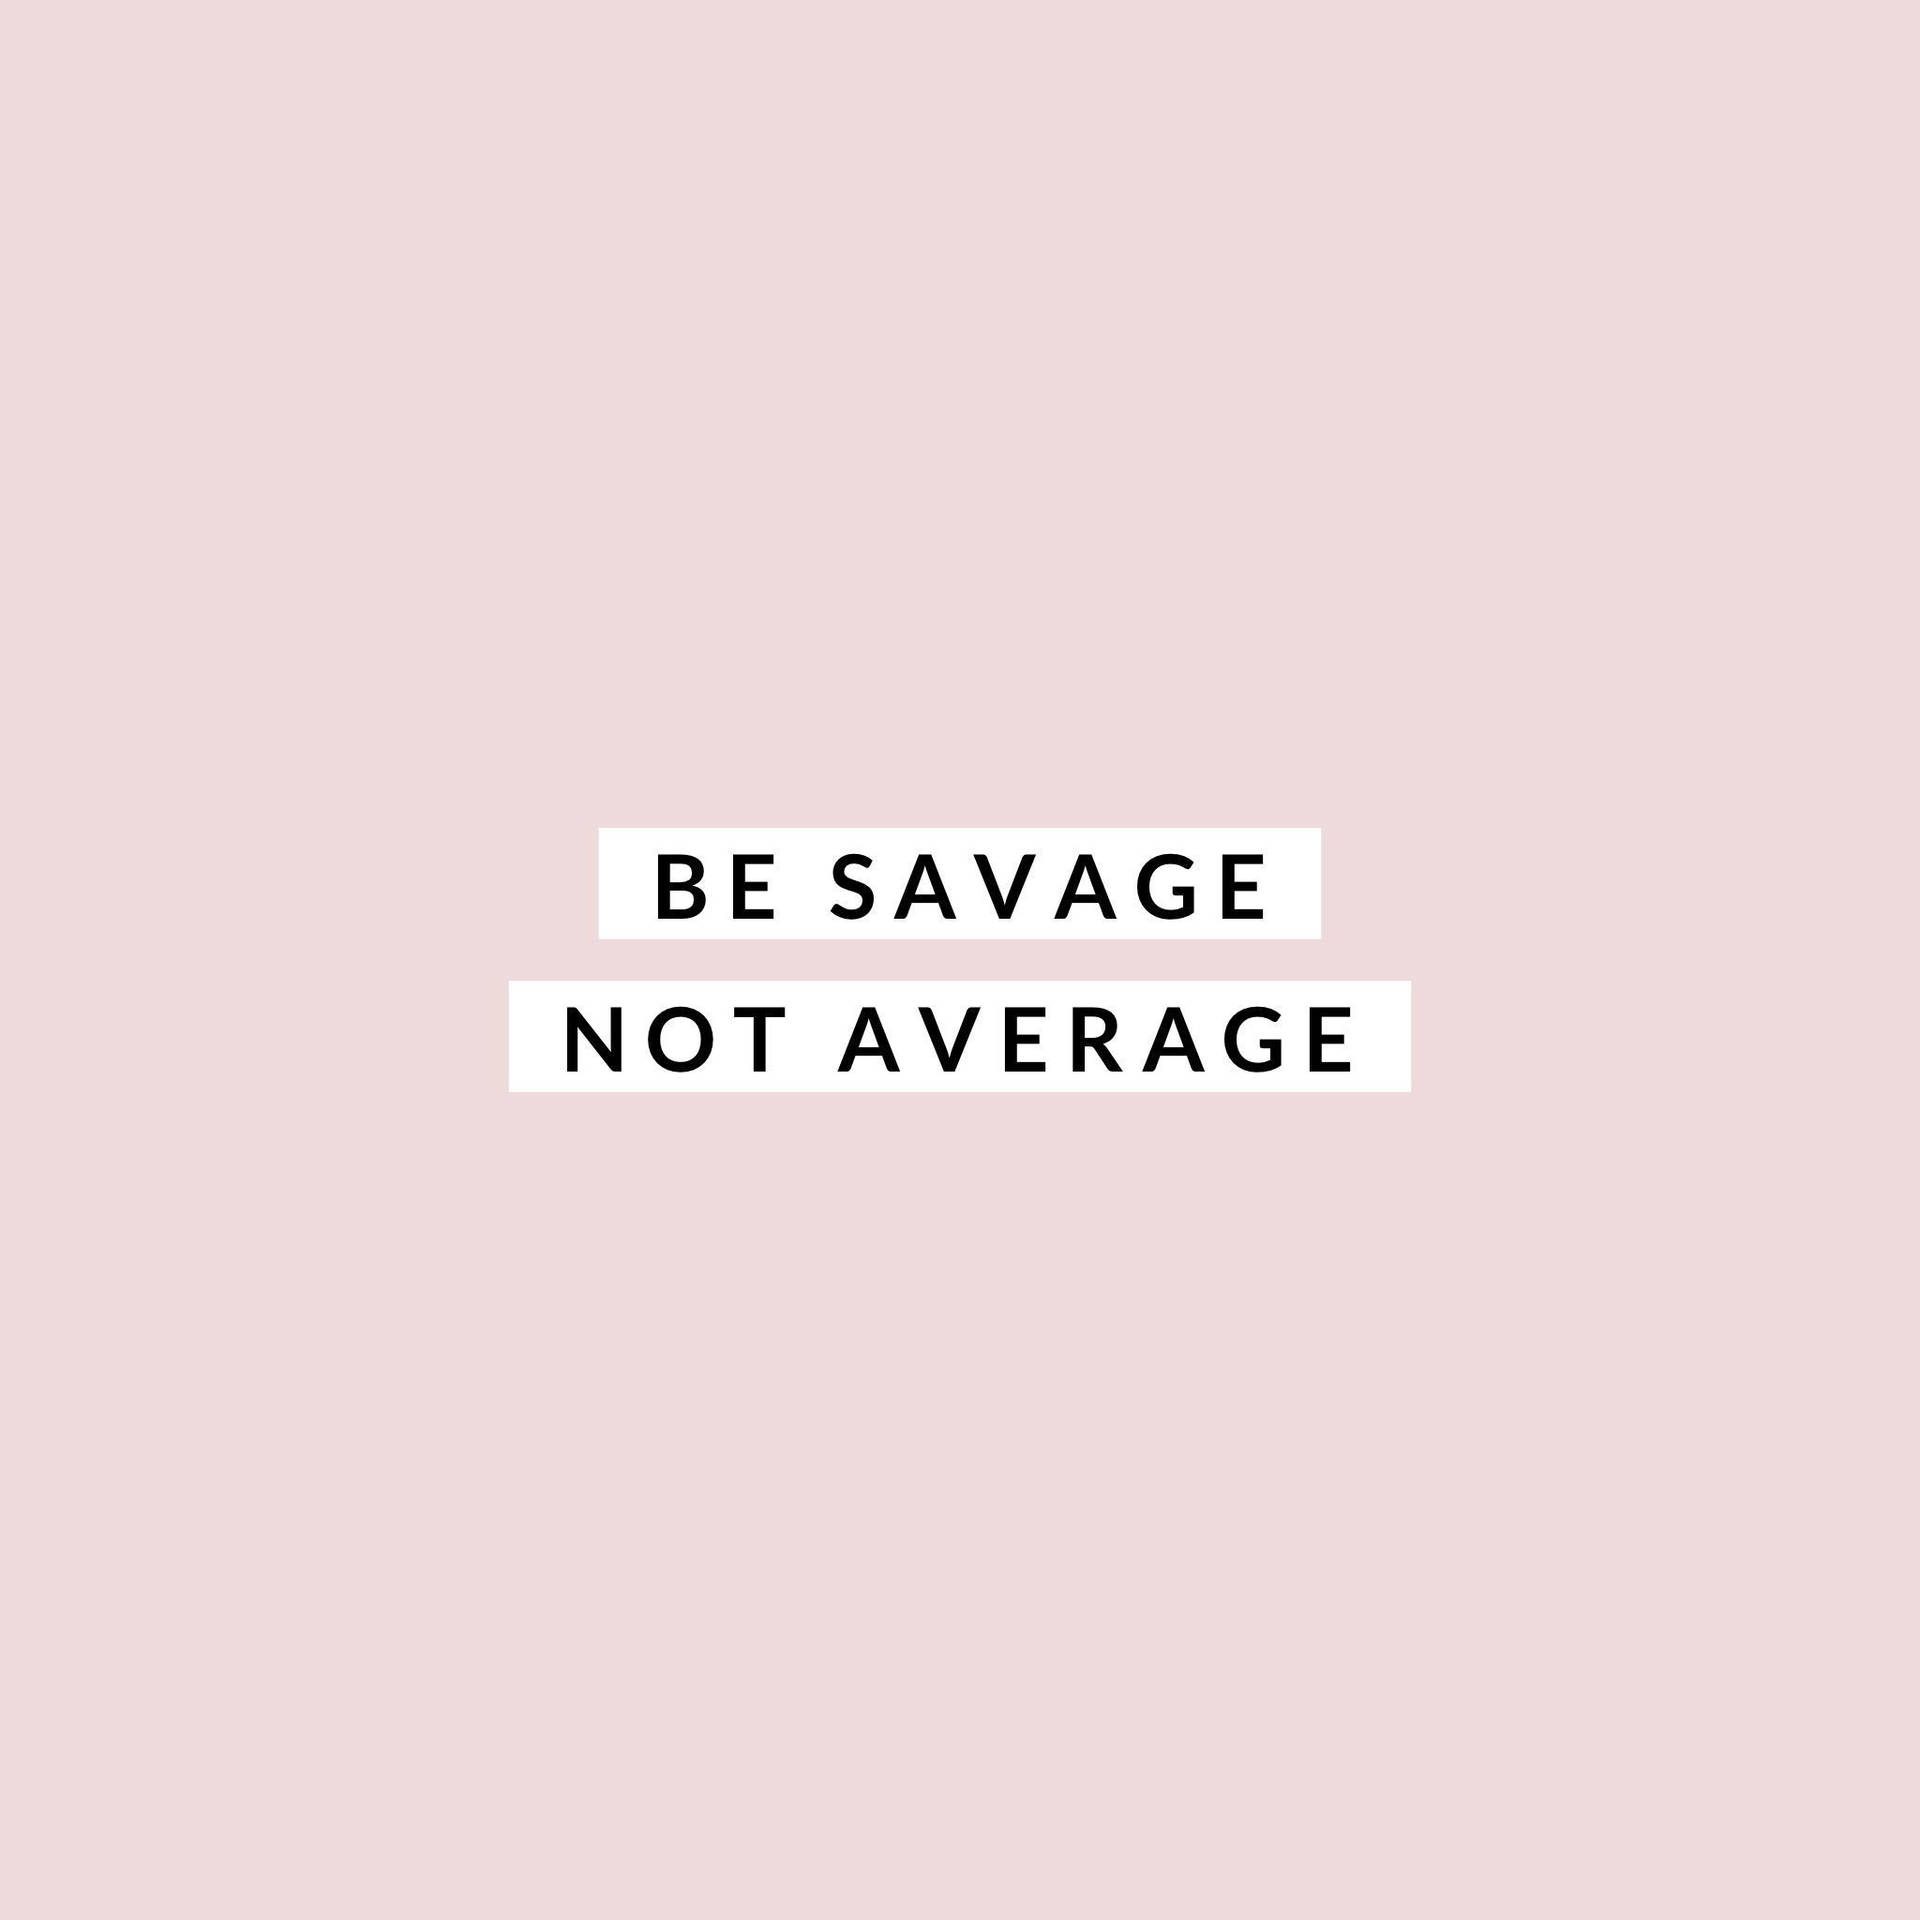 Savage Quote In Pink Background